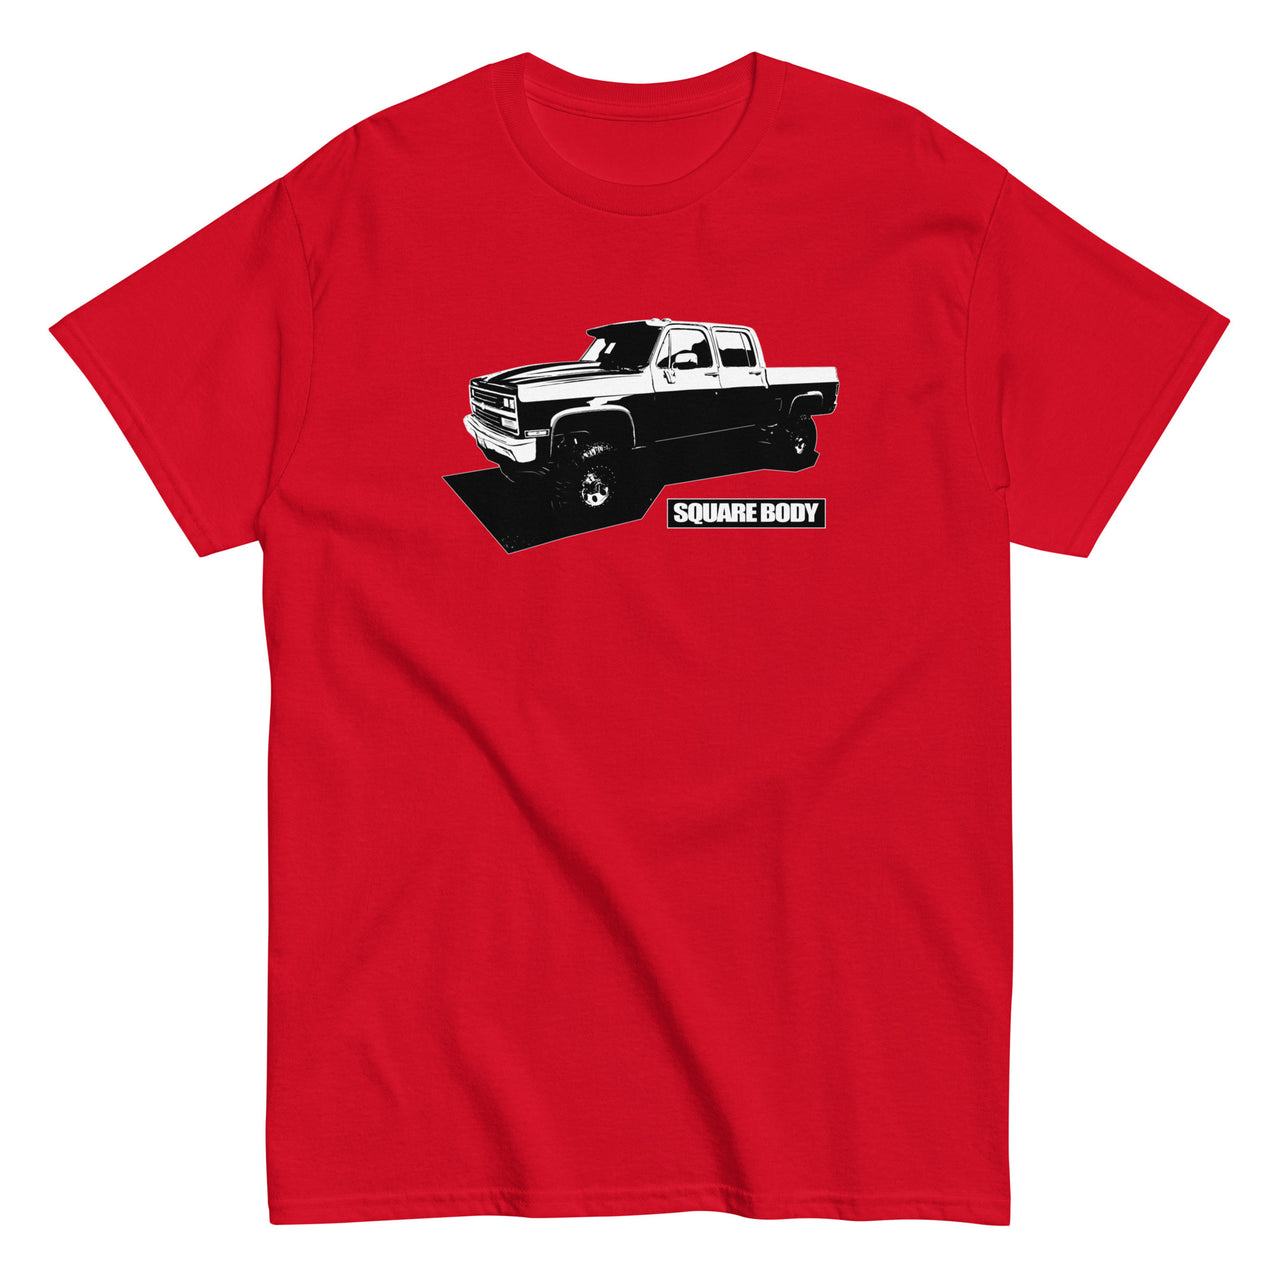 Square Body Crew Cab Truck T-Shirt in red